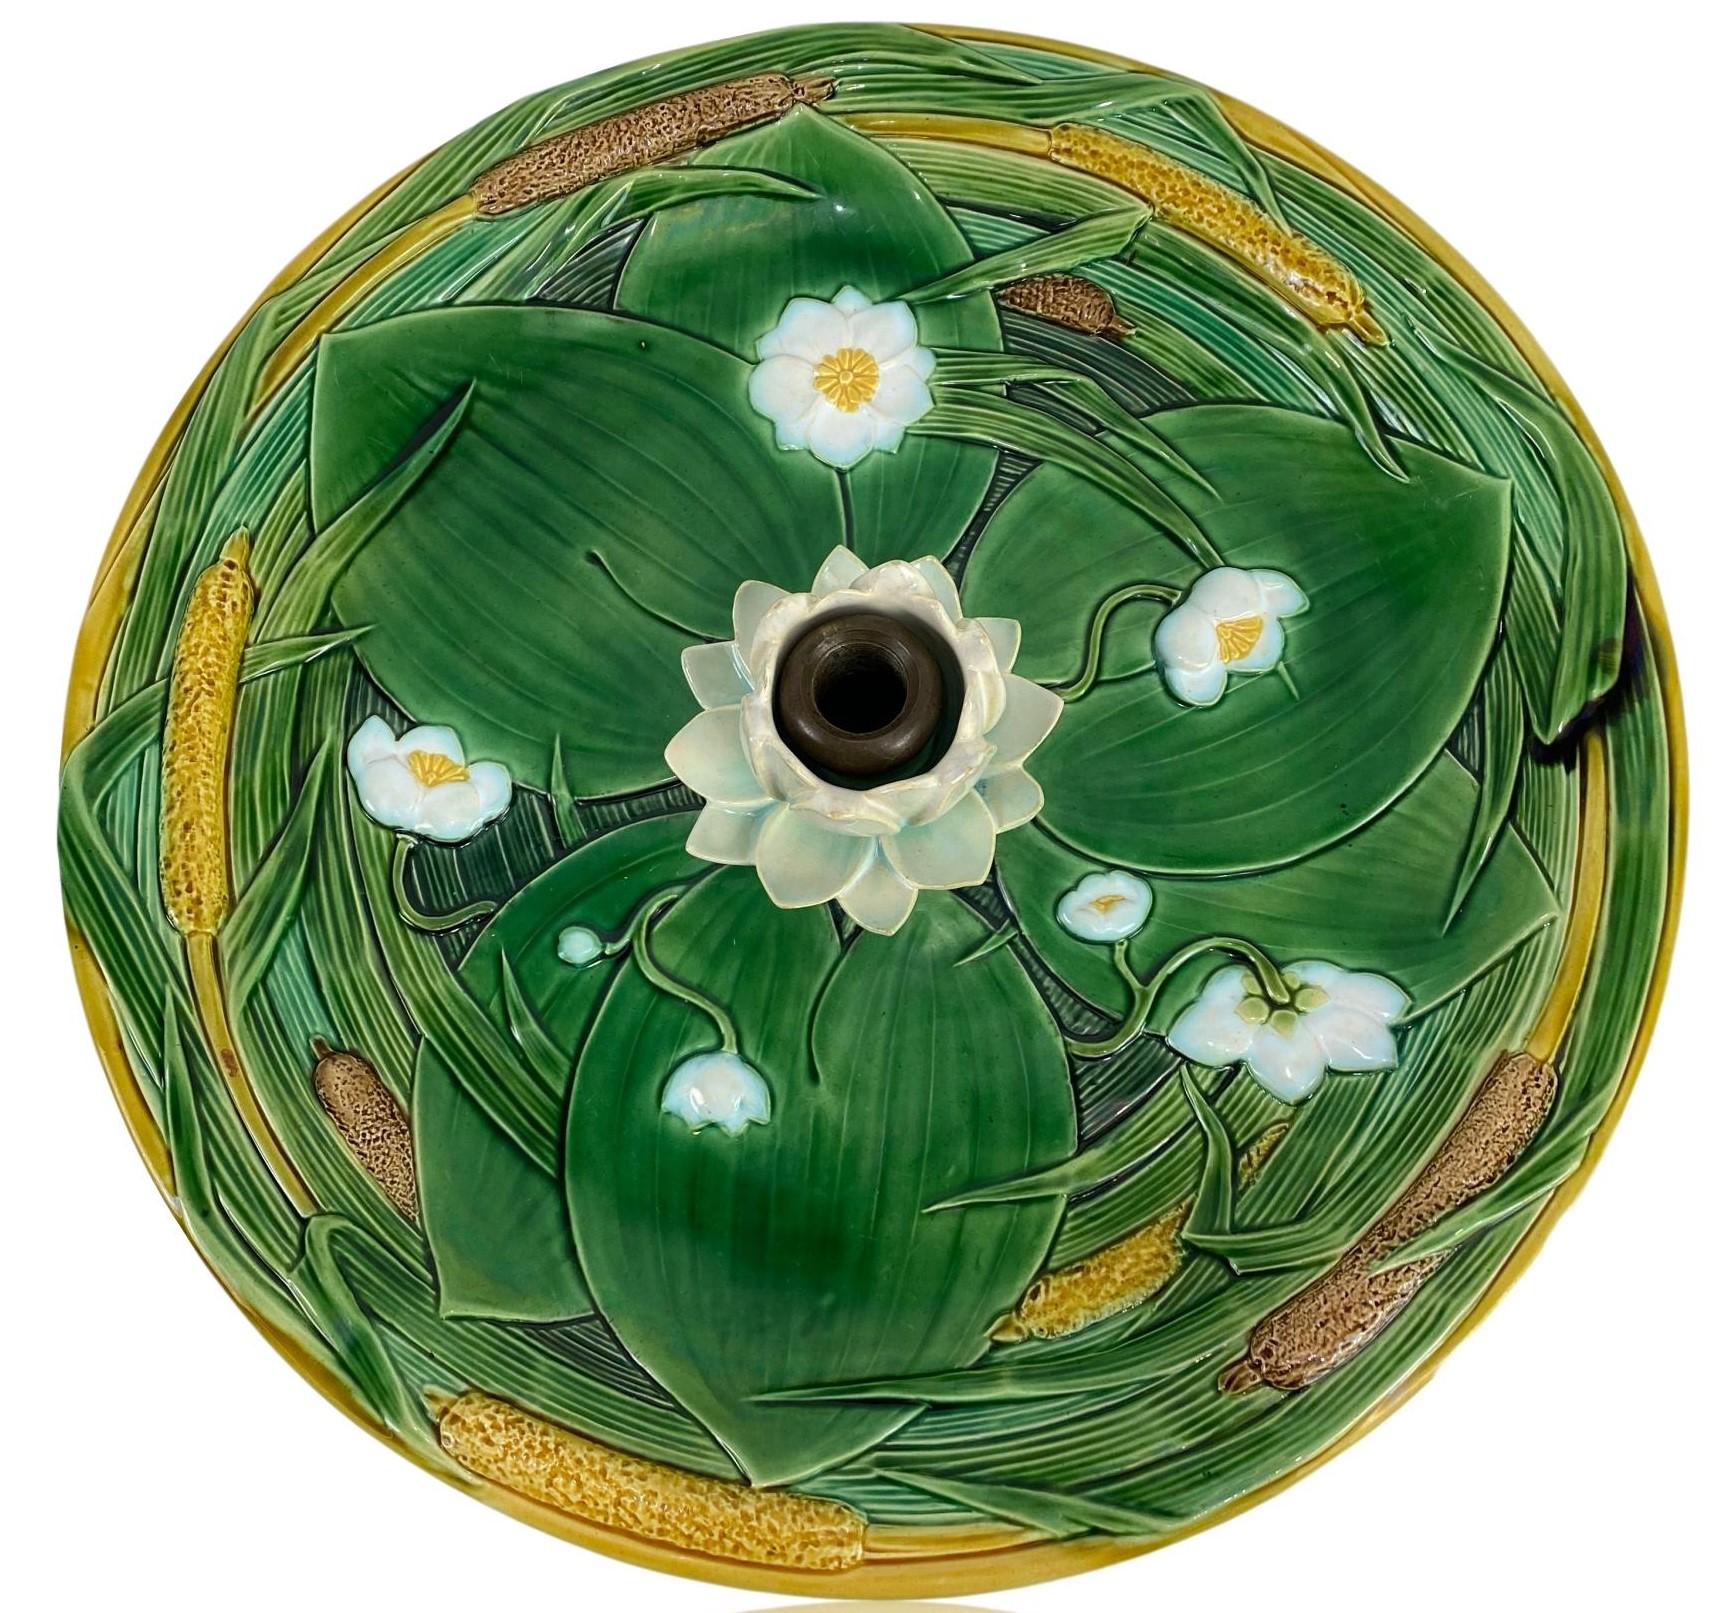 Minton Majolica centerpiece, naturalistically modeled as a pond bed with simulated water glazed in cyan blue, with green glazed lily pads and flowering pond lilies (lotus), and reeds glazed in various shades of green, with brown and ochre-glazed